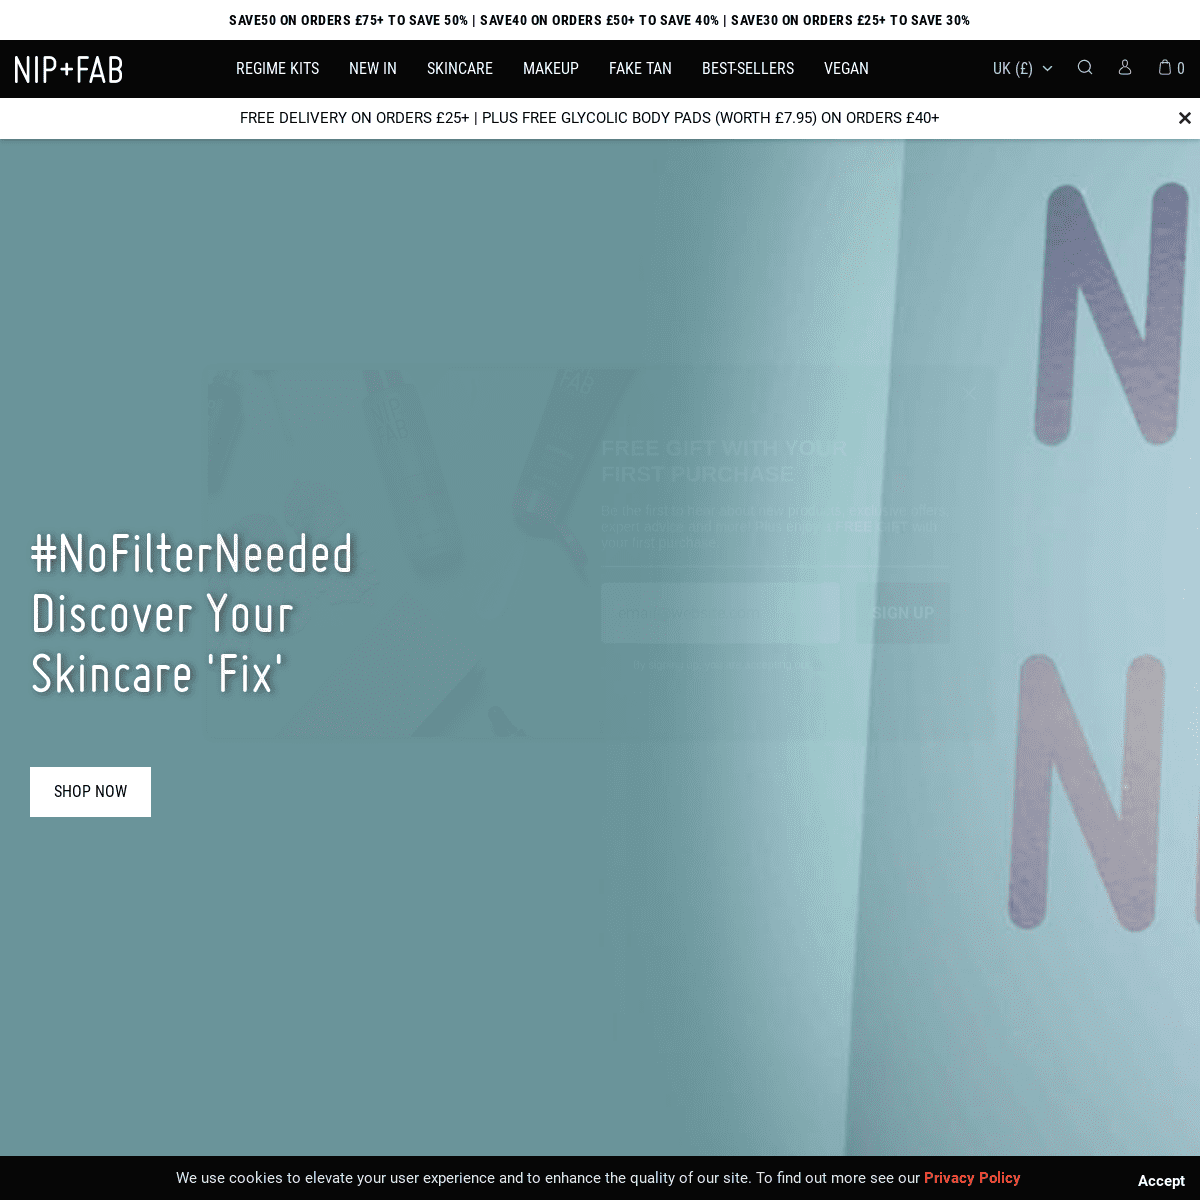 A complete backup of https://nipandfab.com